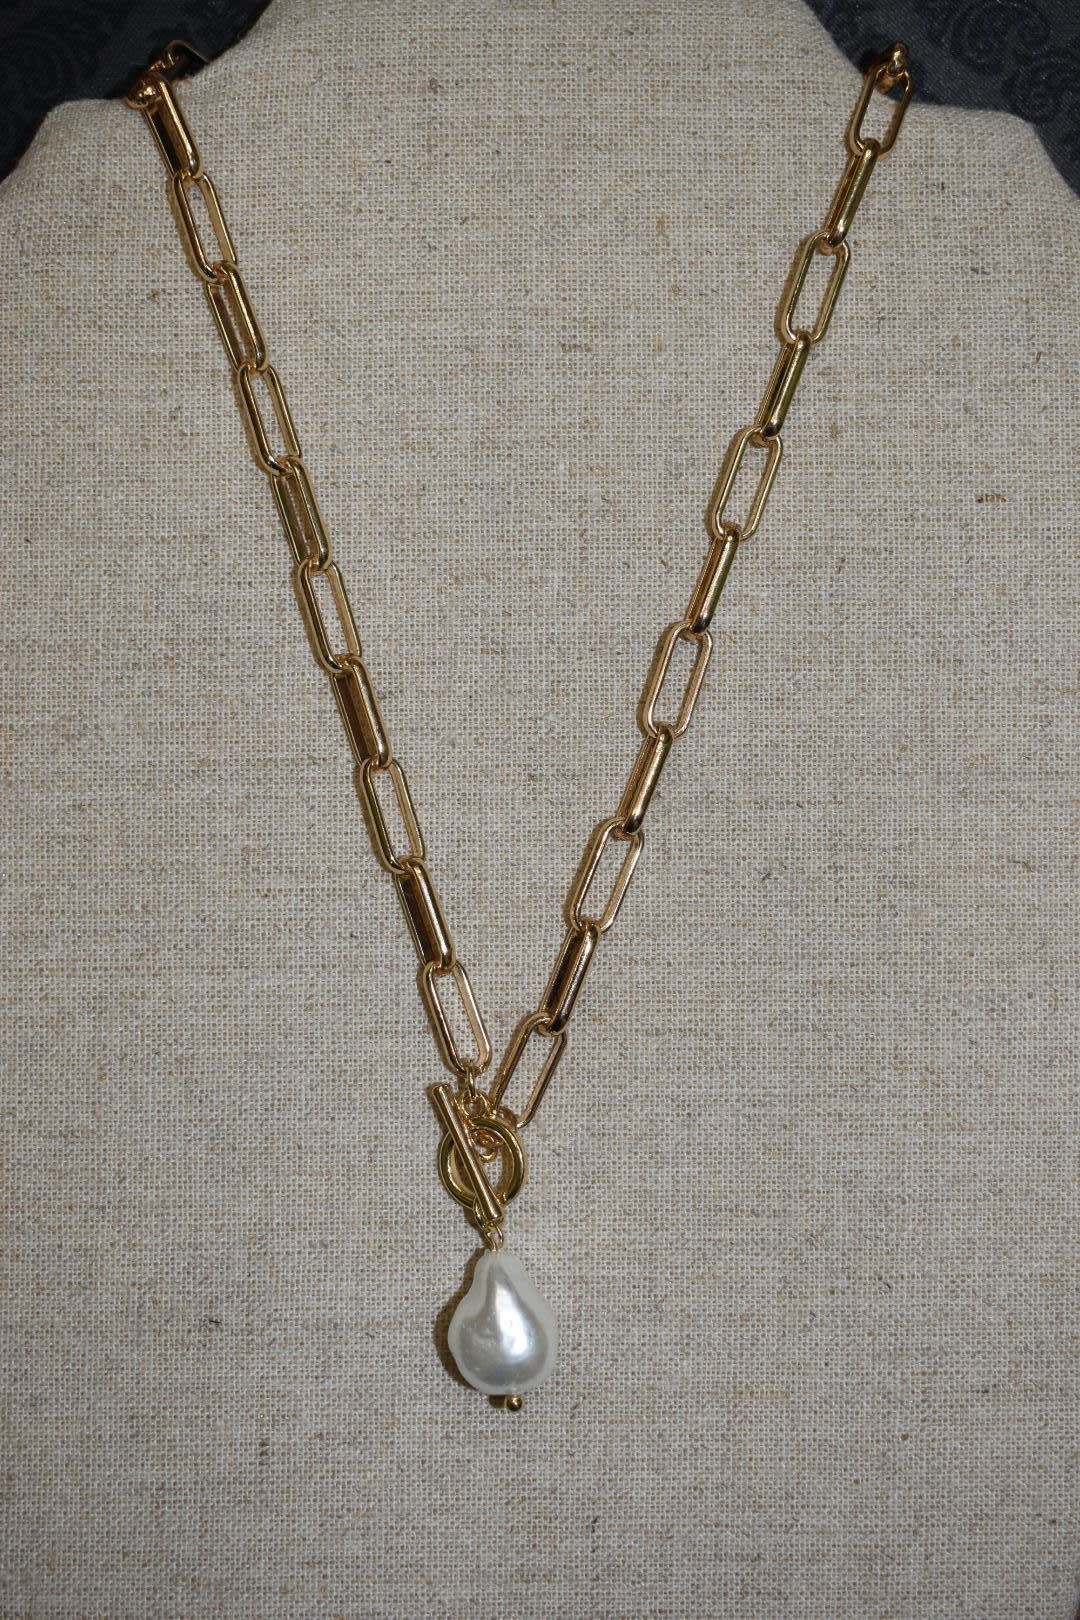 available at m. lynne designs Gold Paperclip Necklace with Baroque Pearl and Toggle Clasp